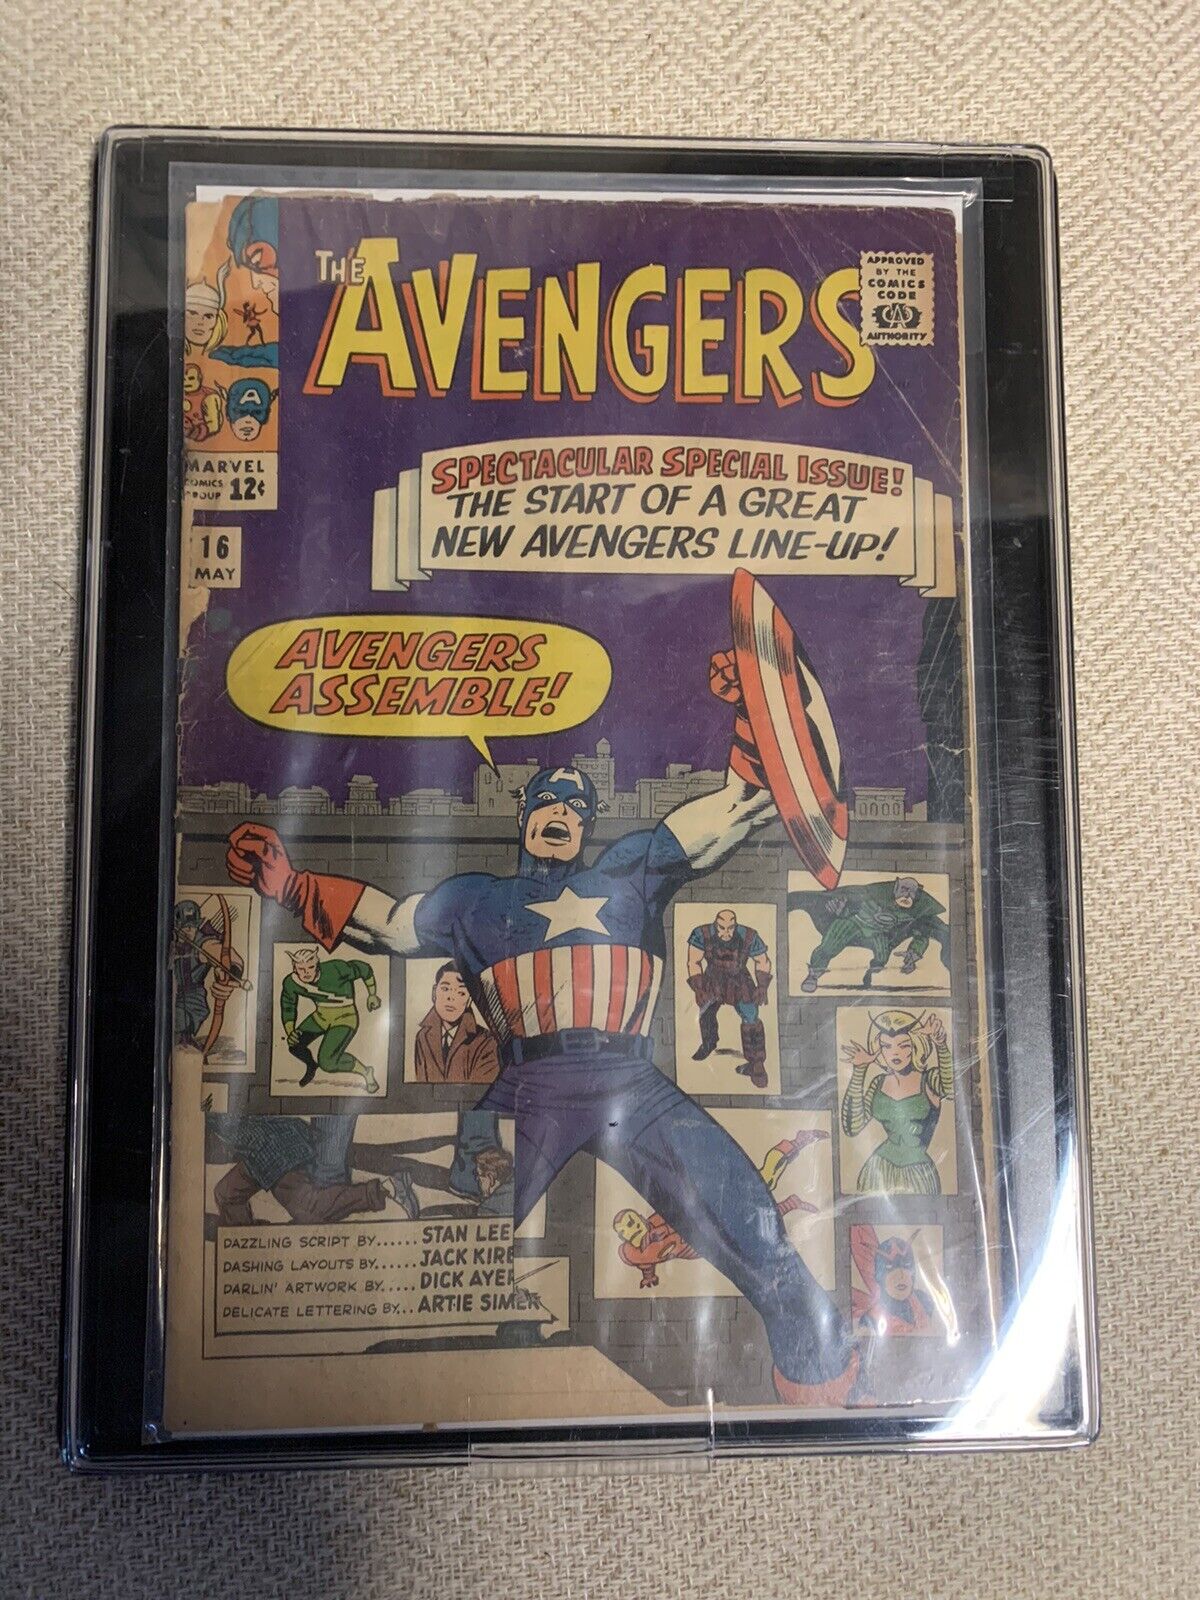 Avengers#16 May 1965 NEW LINE-UP CAP AVENGERS ASSEMBLE COVER